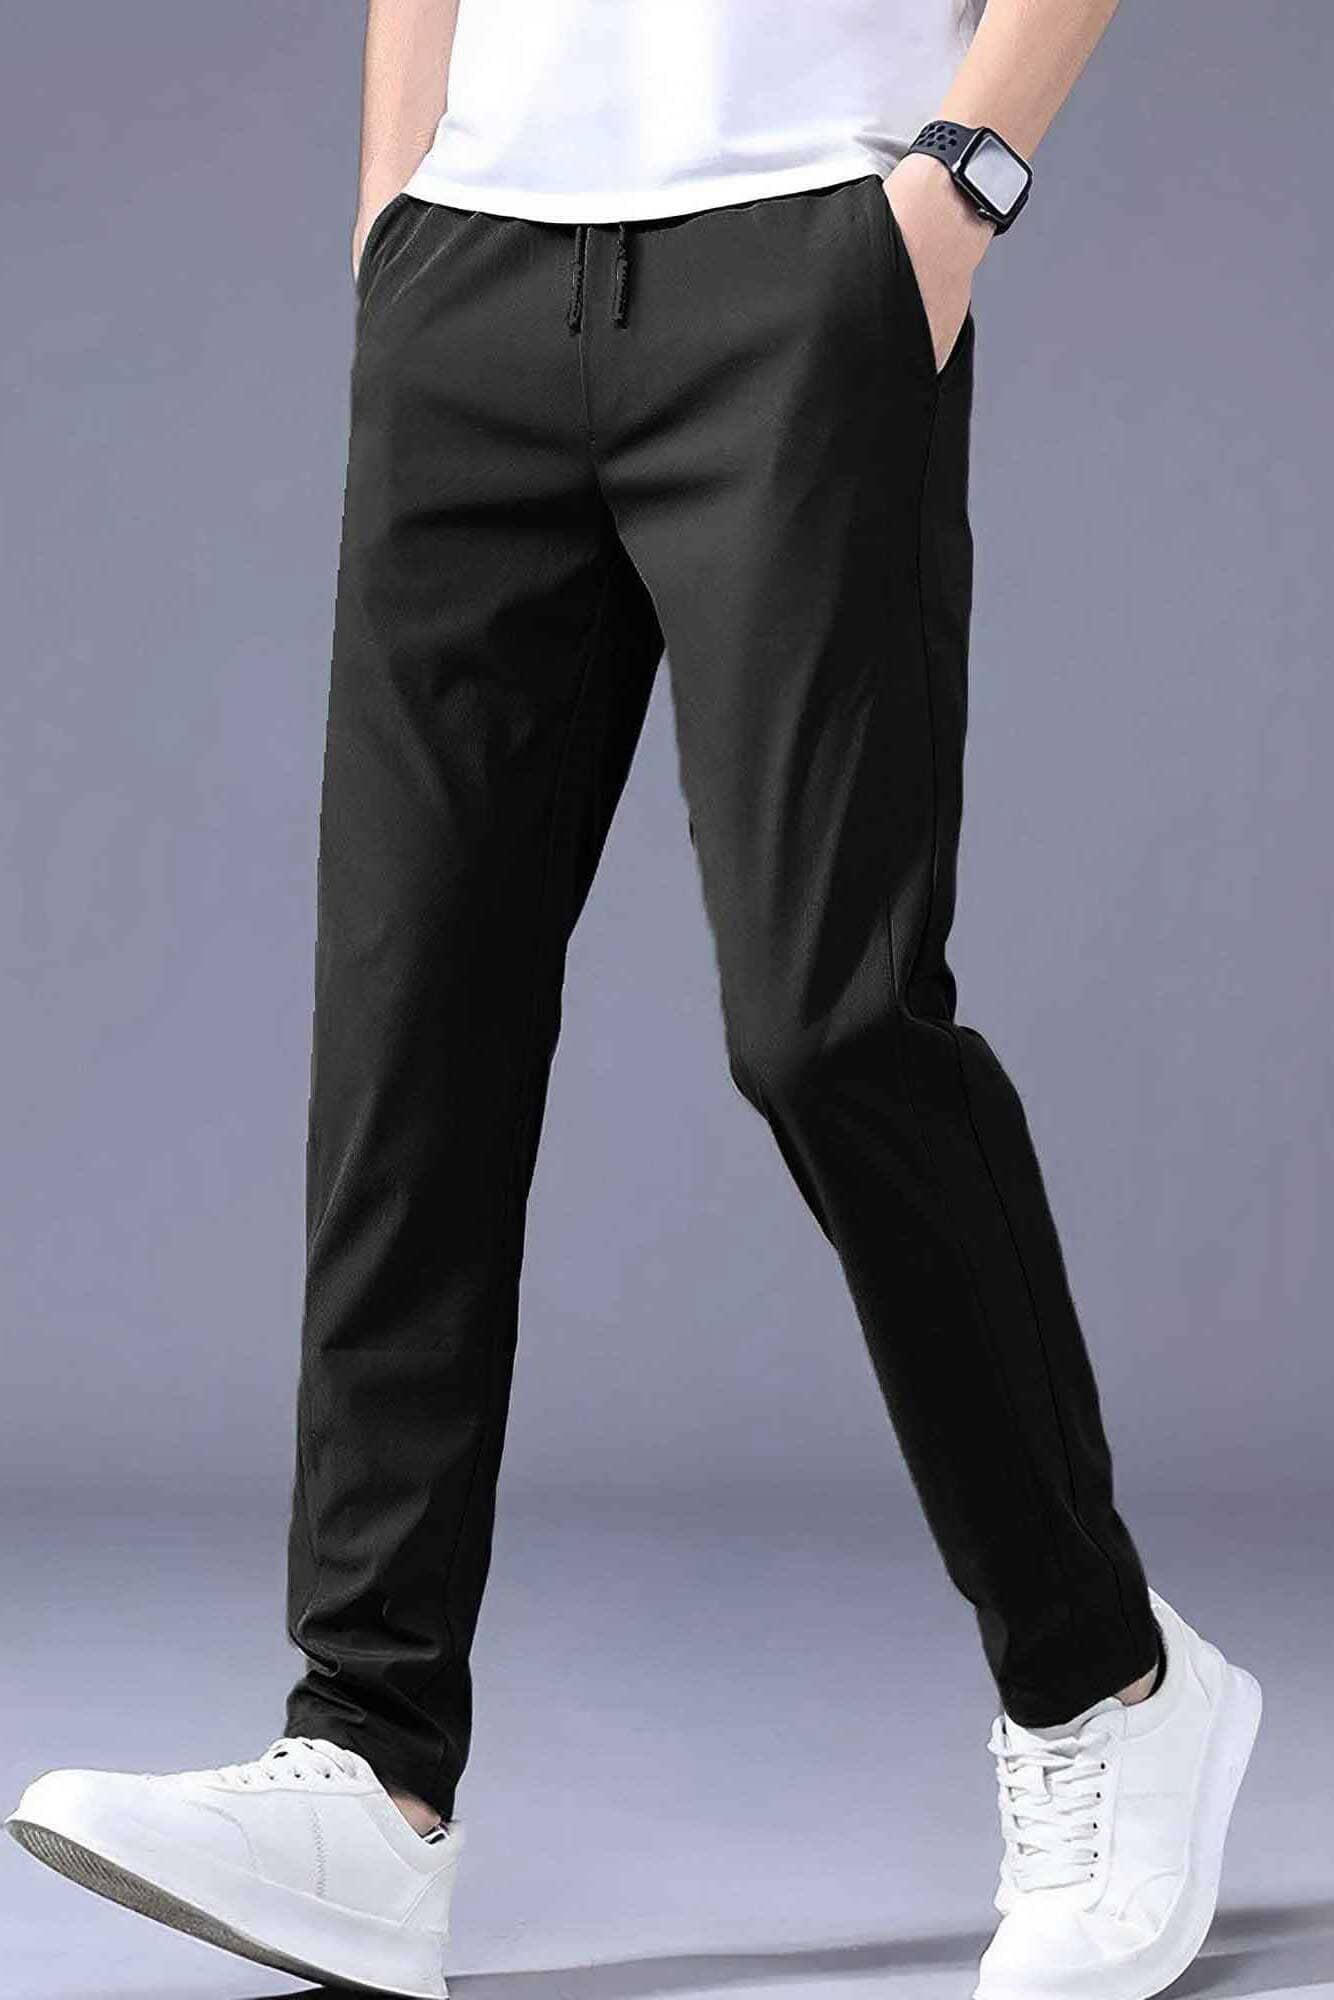 Unisex Lycra Trousers Breathable Quick-dry Easy-care